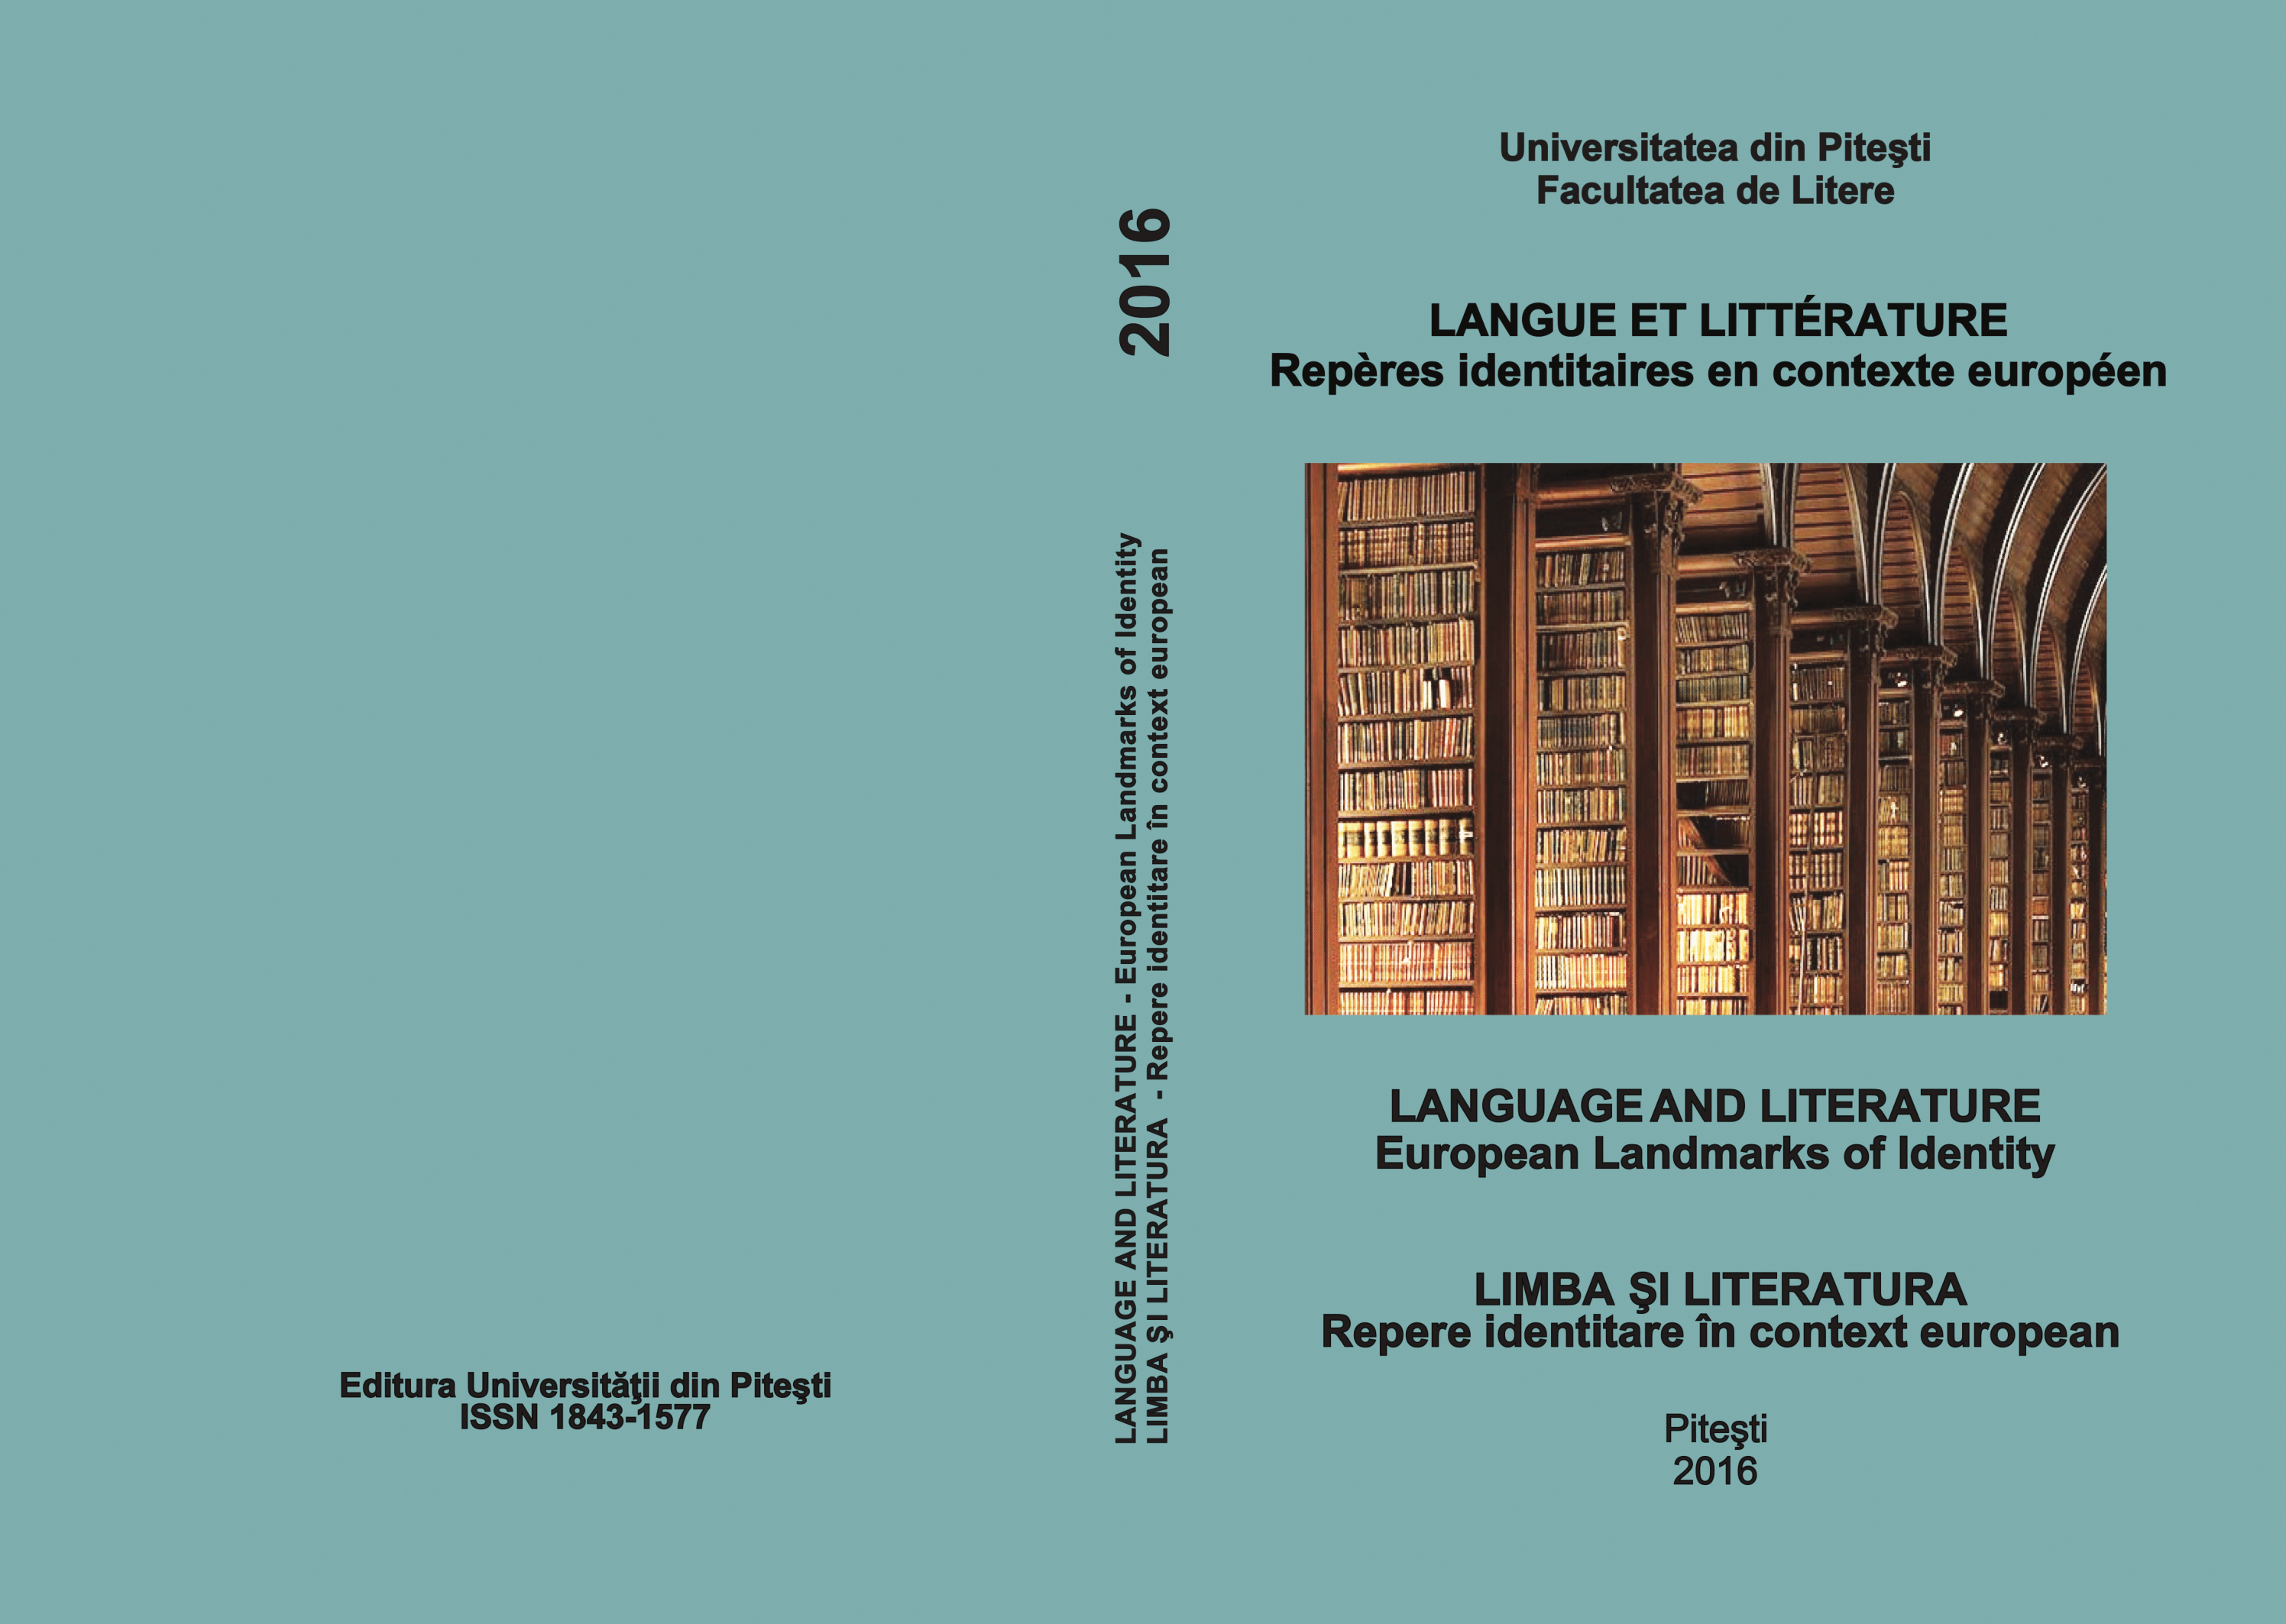 MAKING ONESELF RECEPTIVE VIA HERMENEUTICS, EXEGESIS, TYPOLOGY, AND MIDRASH  IN INTERPRETING THE BIBLE AND AMERICAN LITERATURE  (A CASE STUDY ON THE MAJOR WORKS OF HERMAN MELVILLE) Cover Image